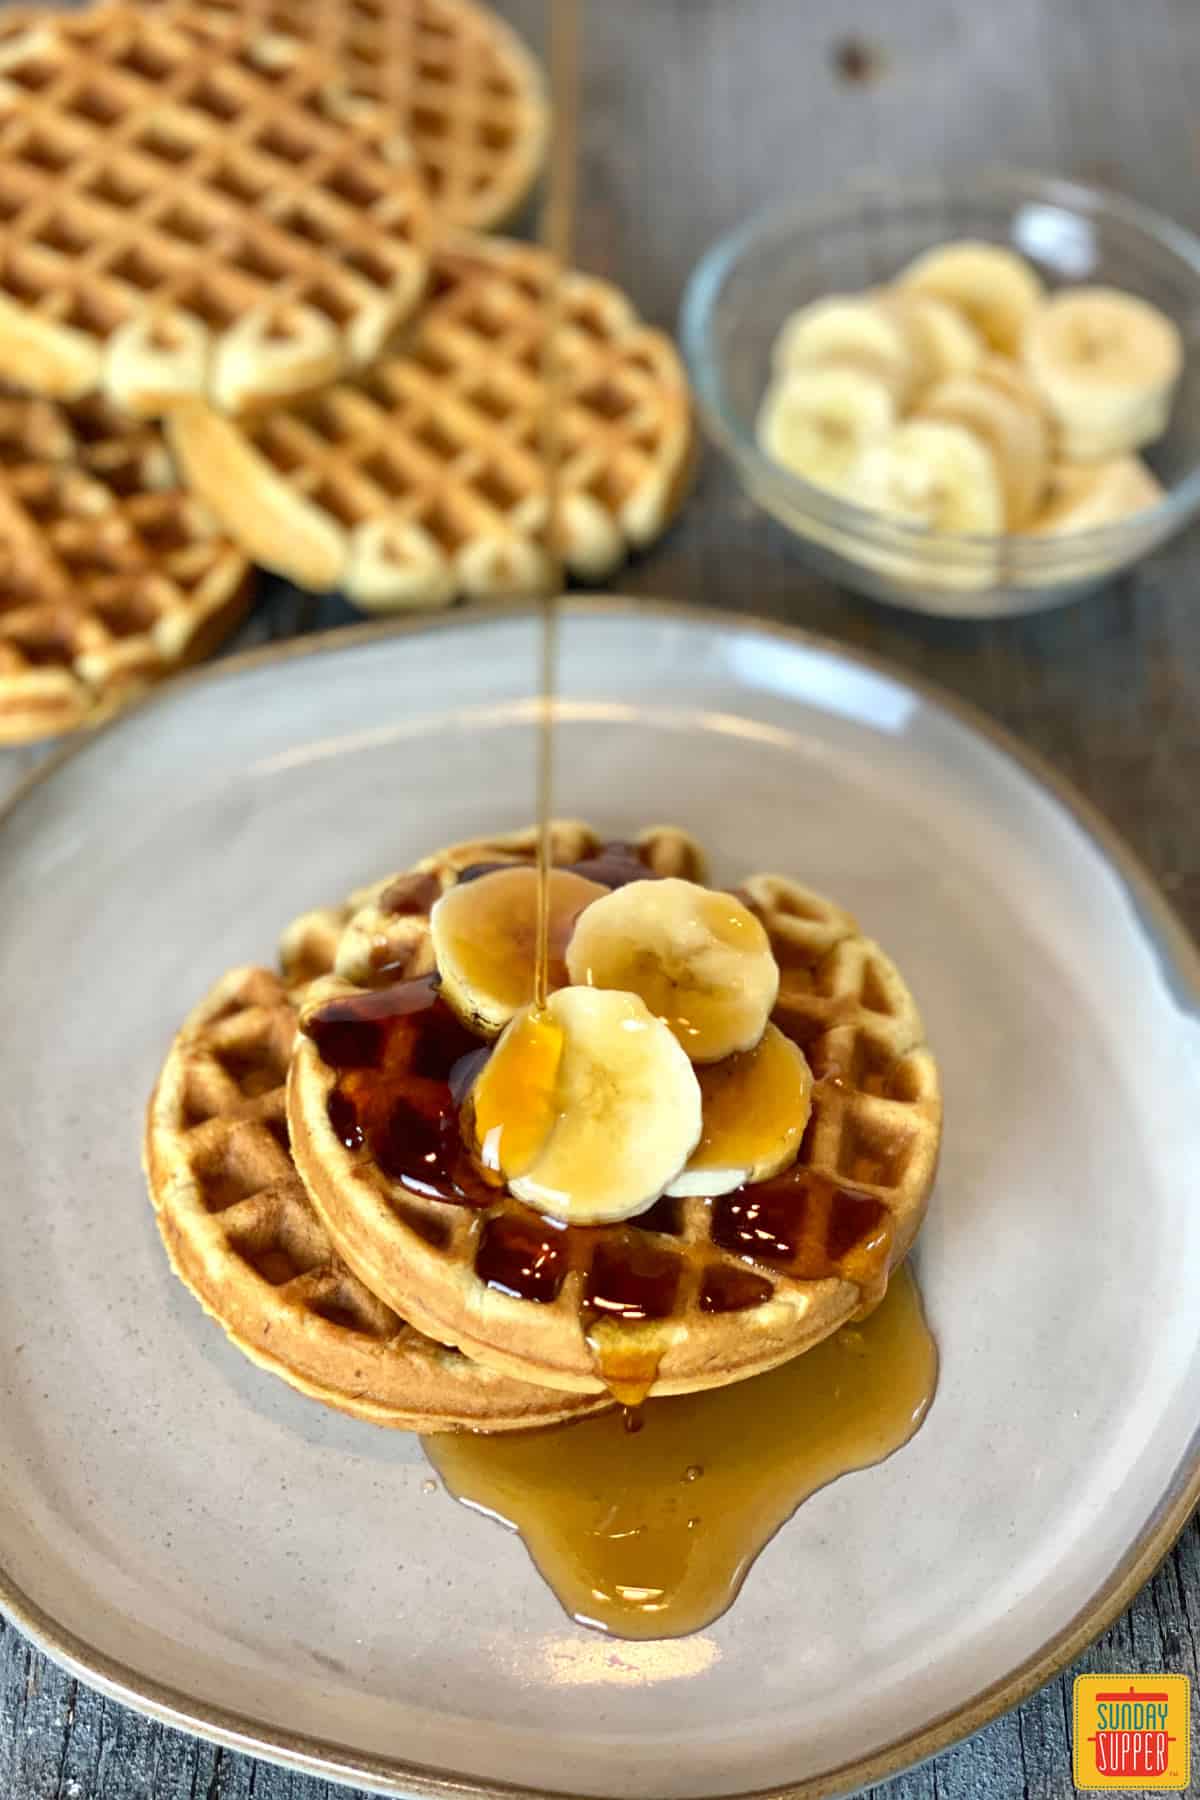 Pouring syrup onto two waffles on a plate with banana slices